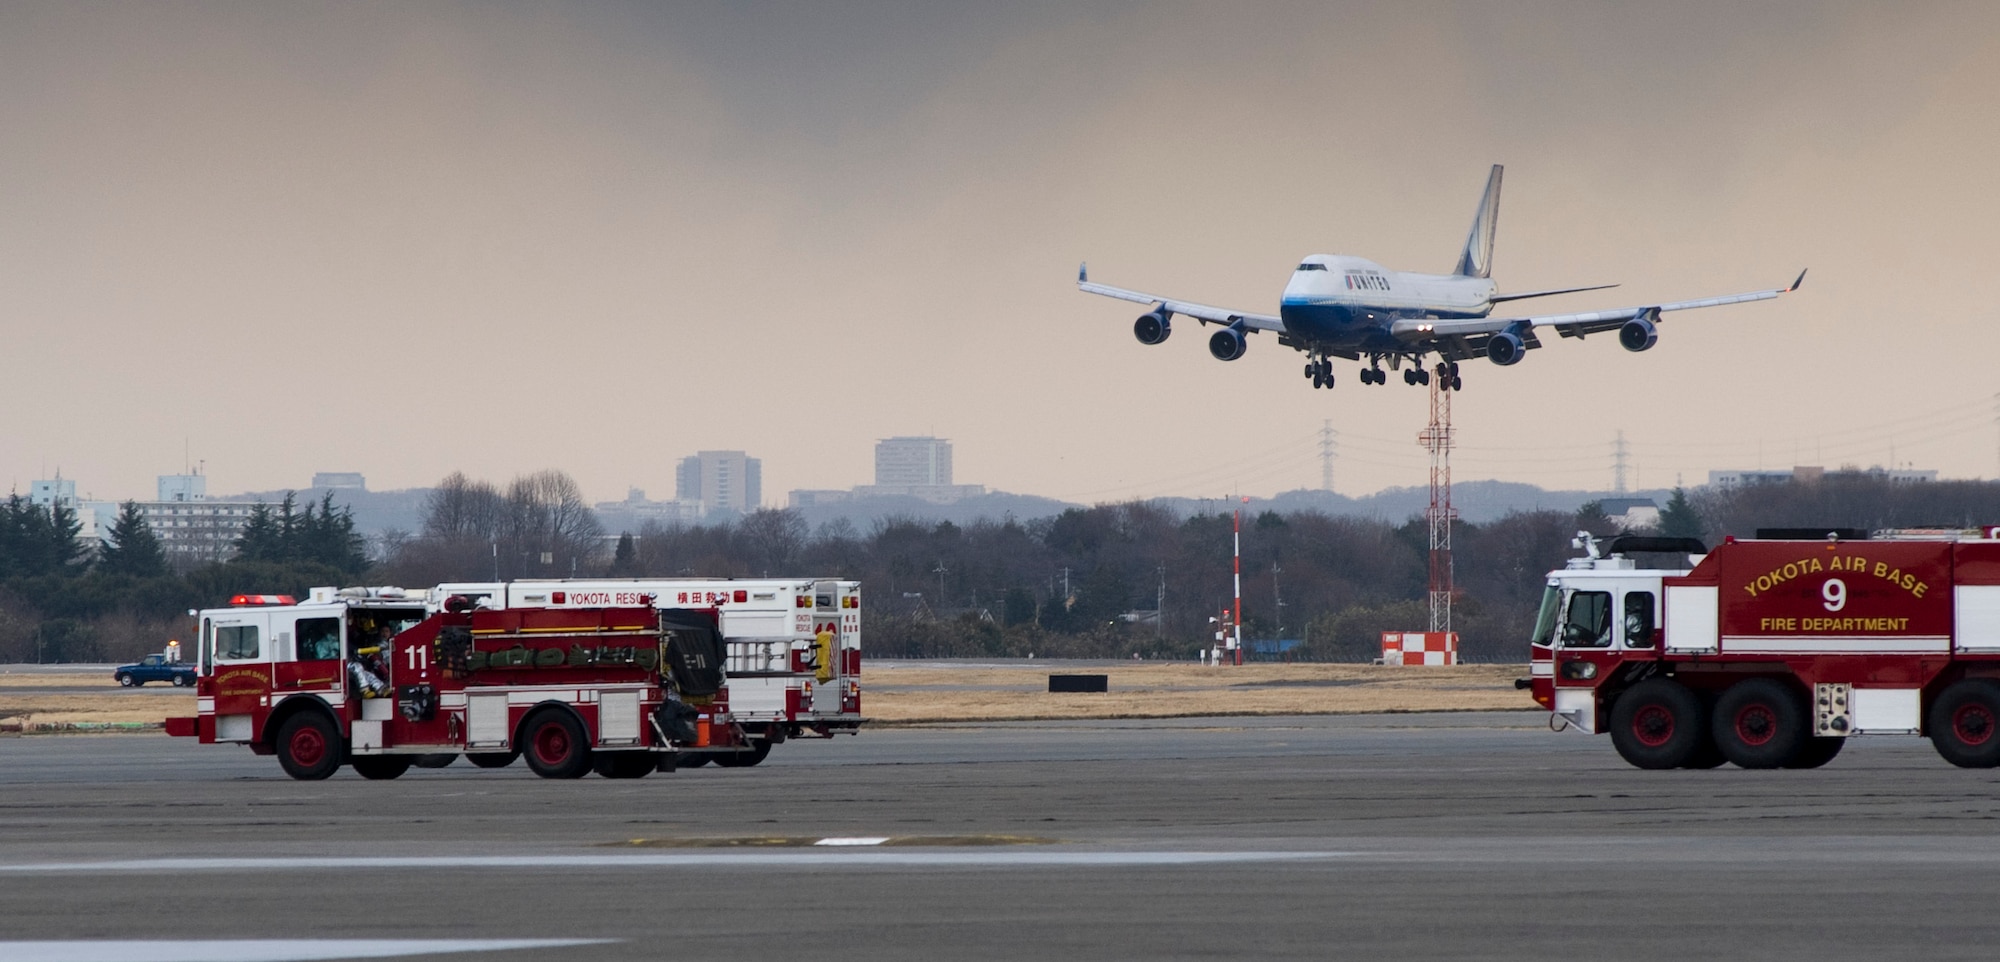 A United Airline flight lands here 11 March, after diverting from Narita International Airport. Yokota Air Base opened its airfield today after an earthquake struck Tokyo. (U.S. Air Force photo/Master Sgt. Kimberly Spinner) 